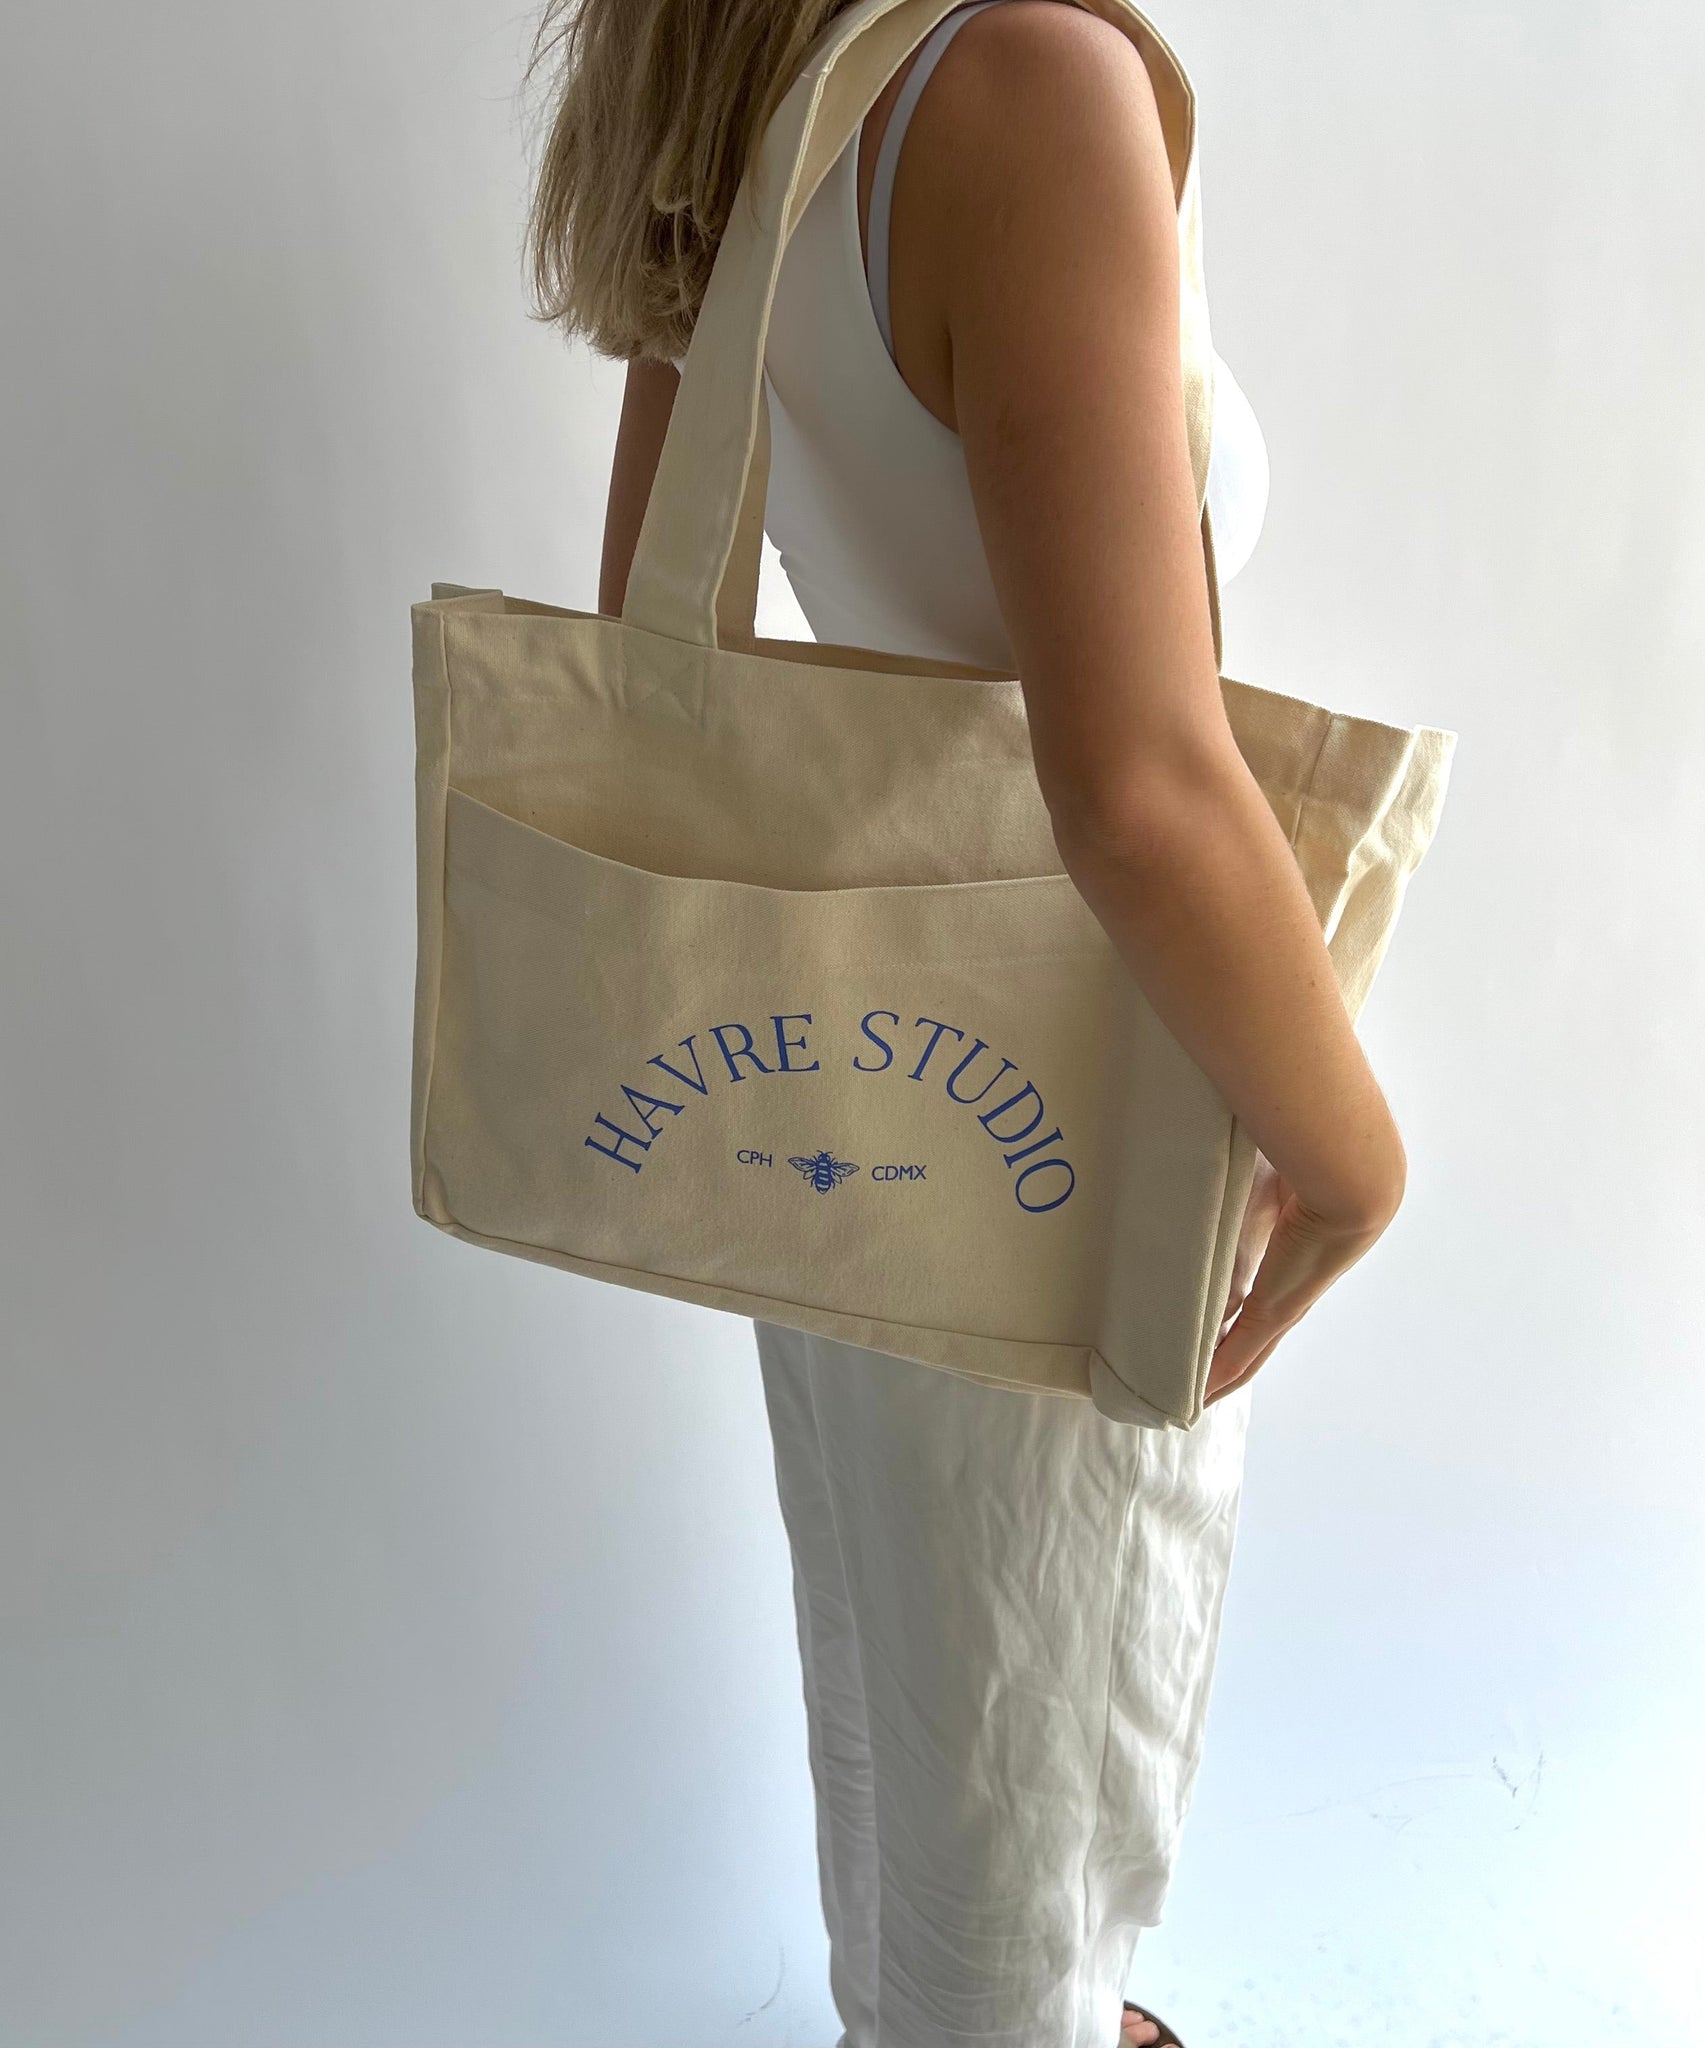 Havre Studio Tote in electric blue with 5 pockets/spaces